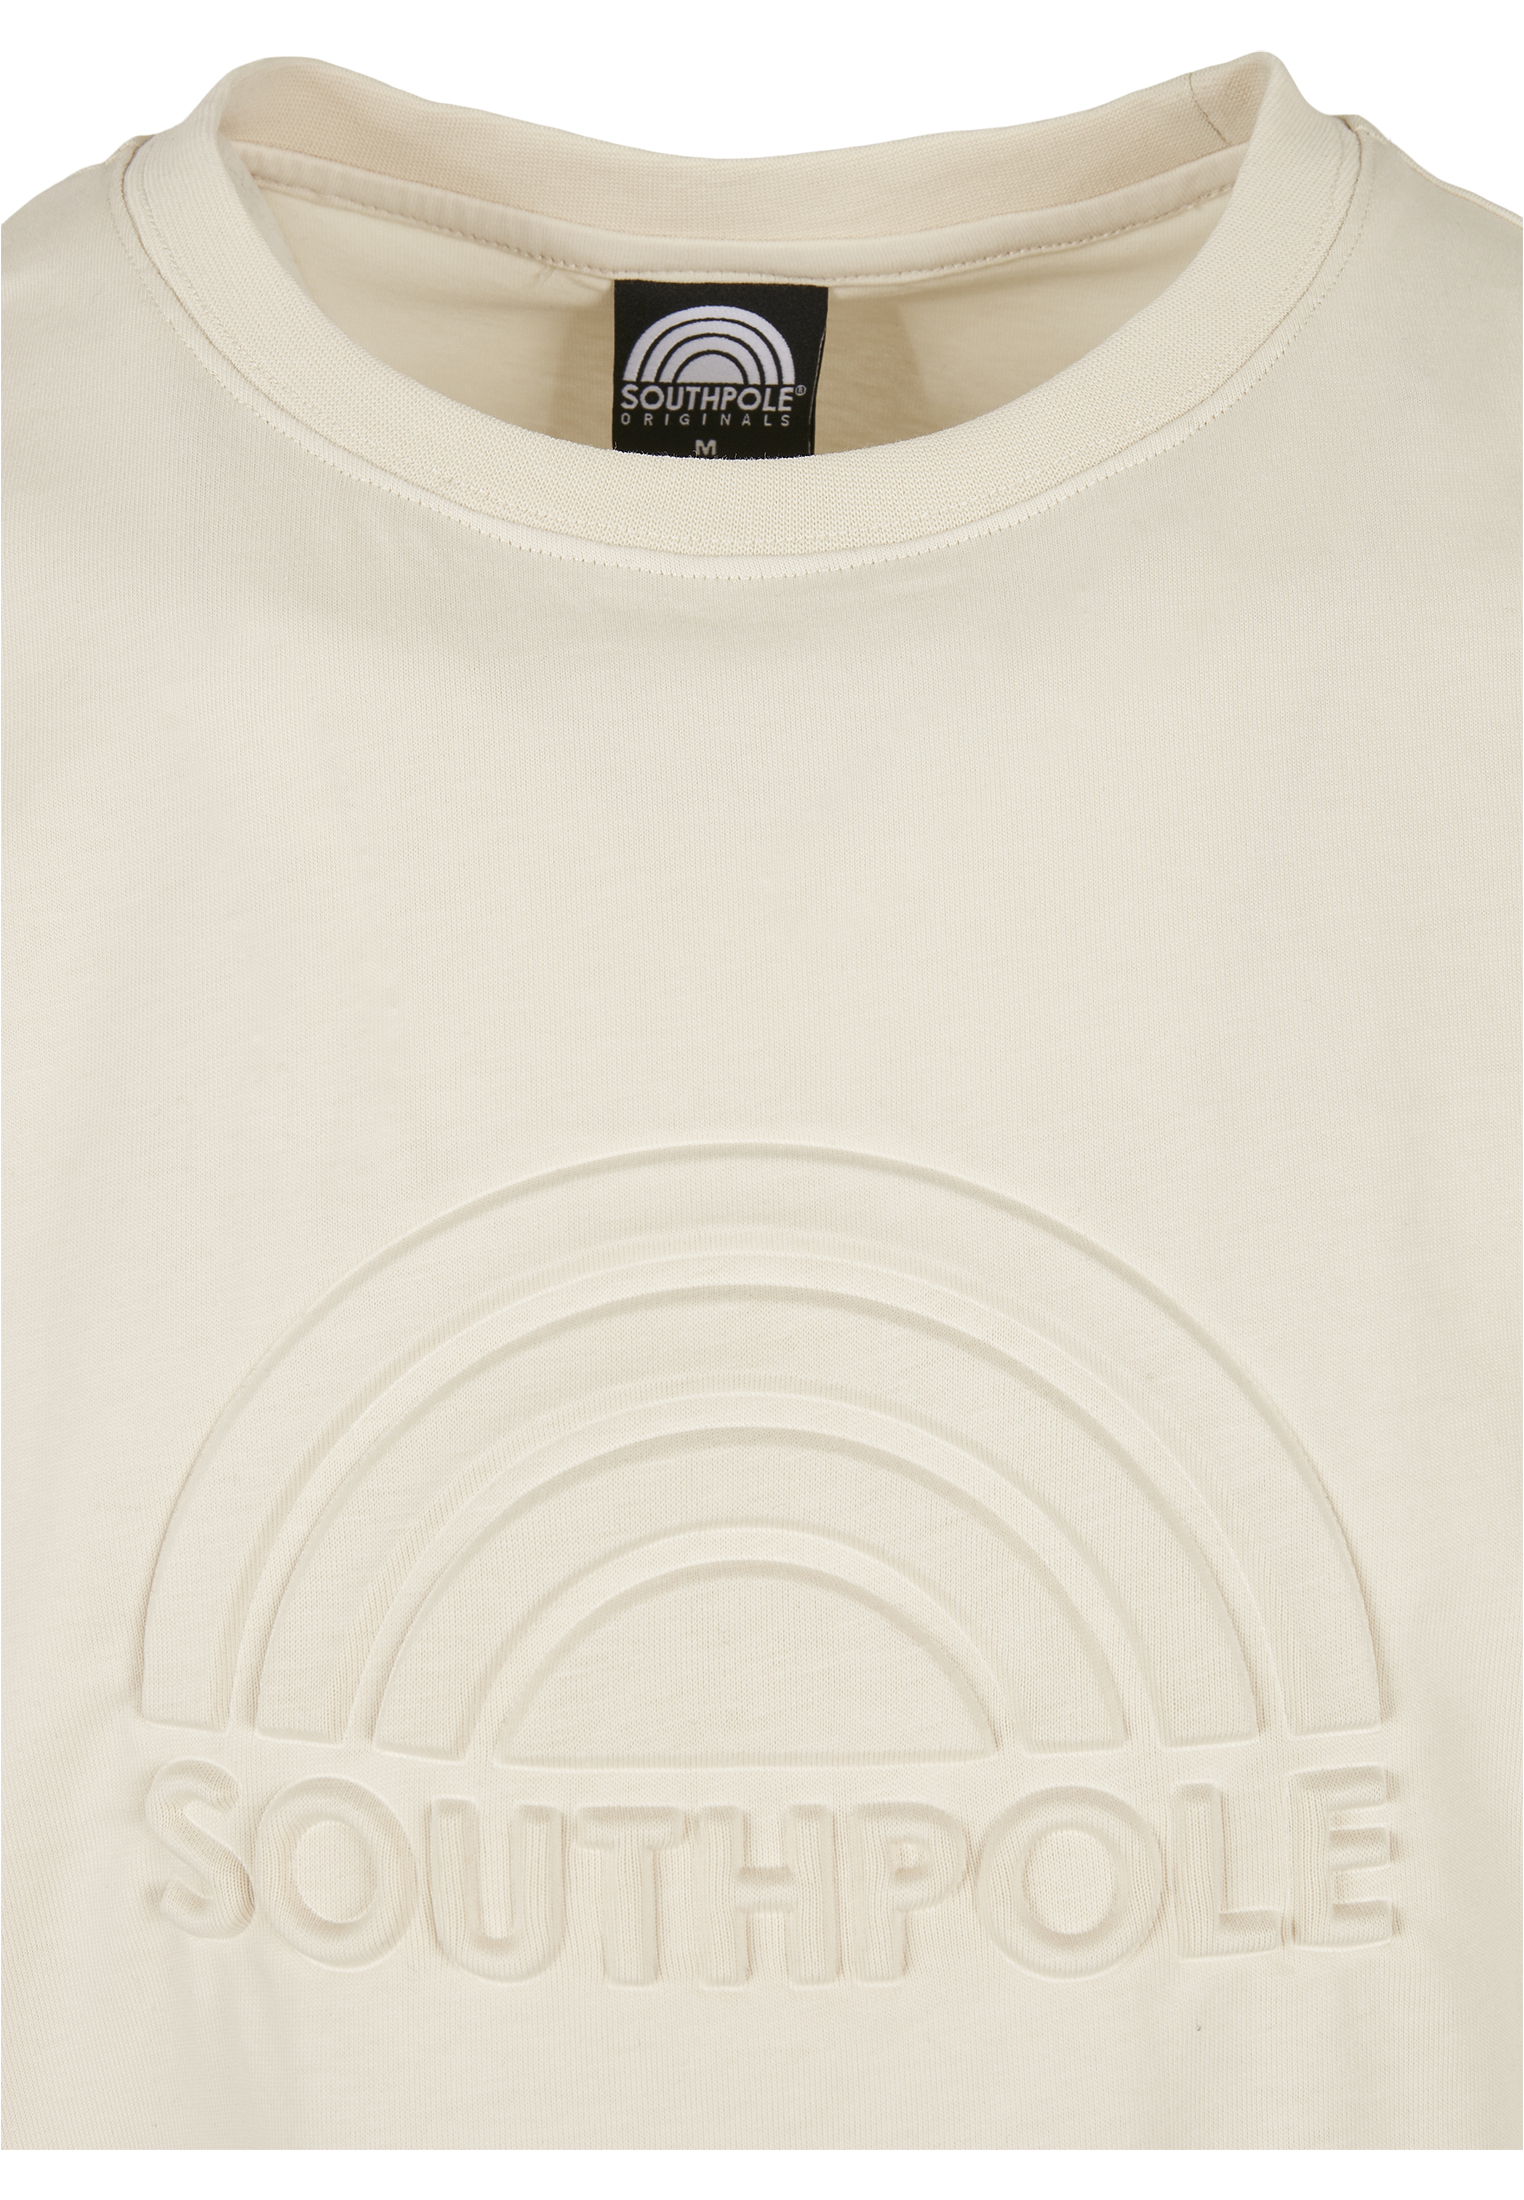 Nos Kollektion Southpole 3D Tee in Farbe sand